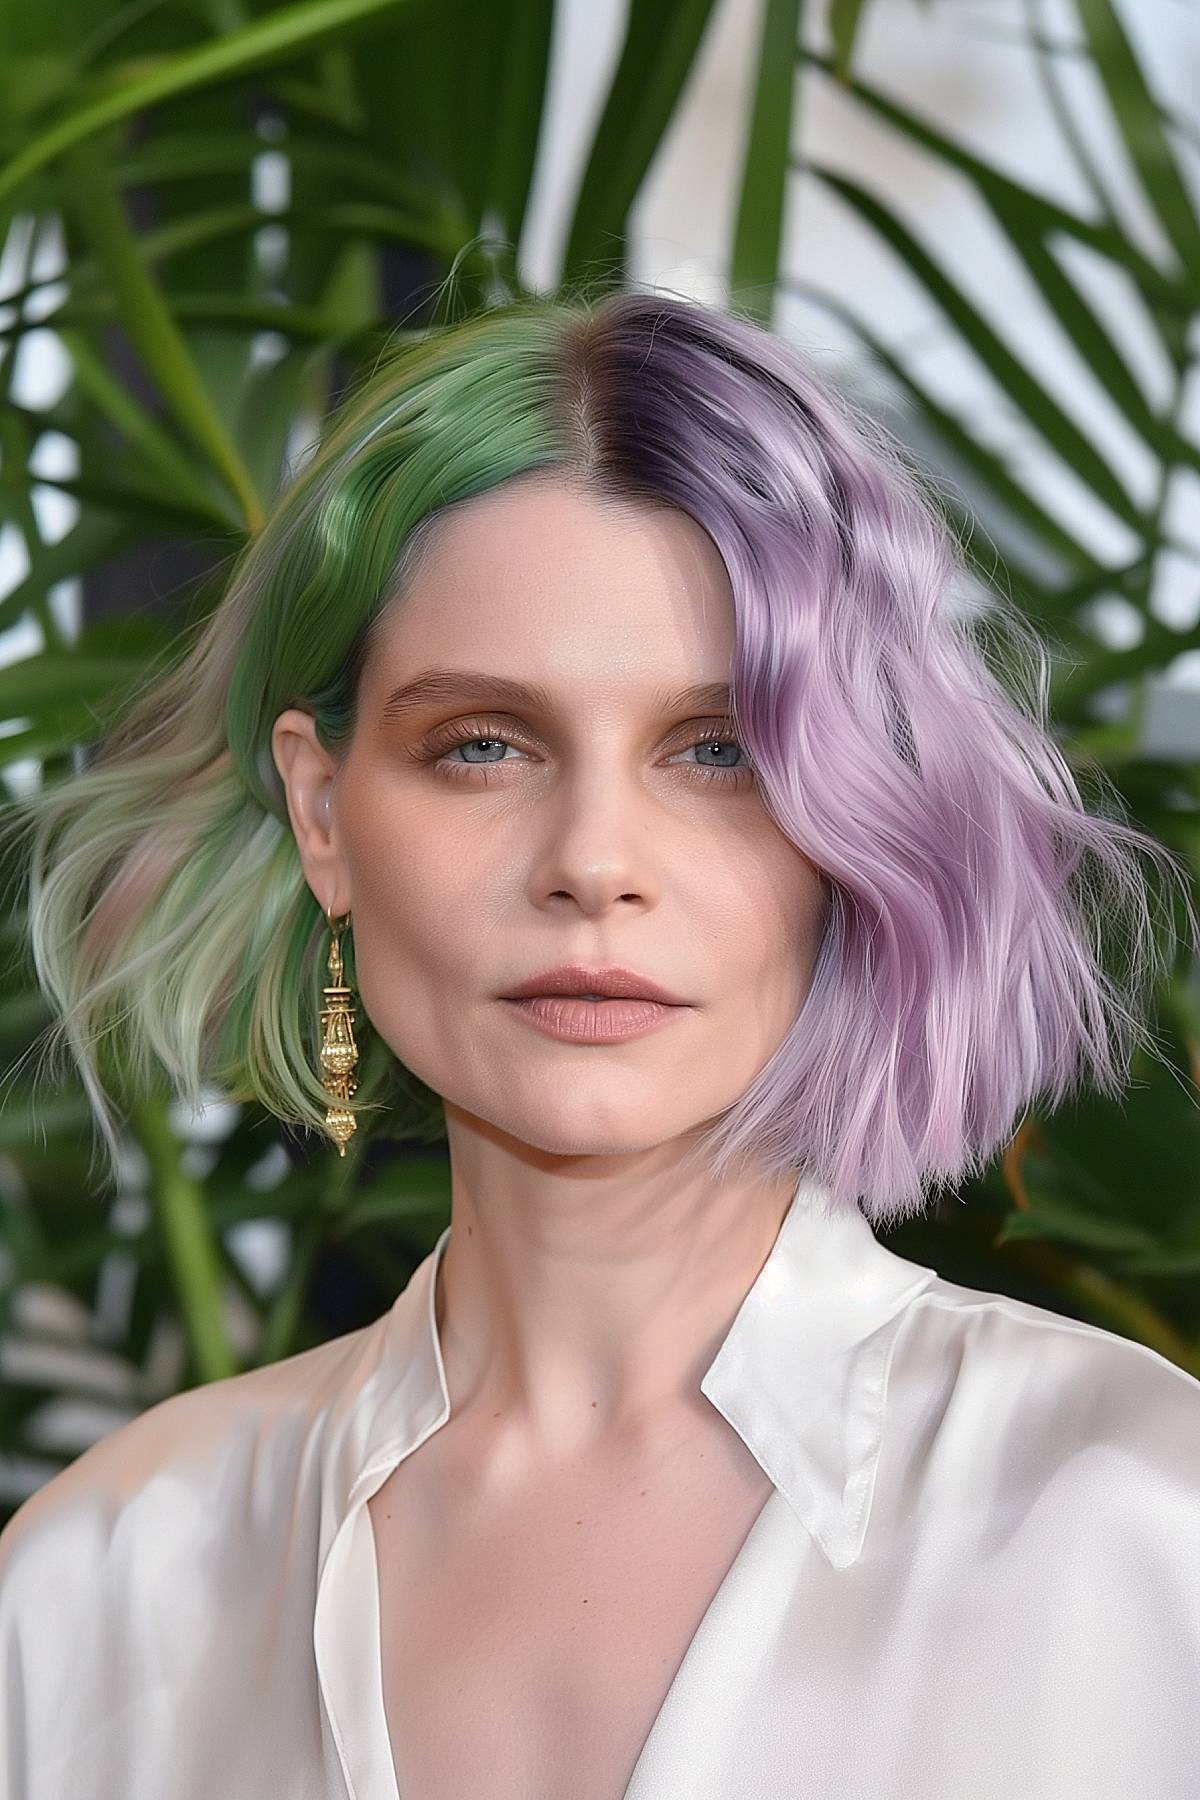 Short, wavy hairstyle combining soft green and lavender for a gentle Gemini-inspired appearance.